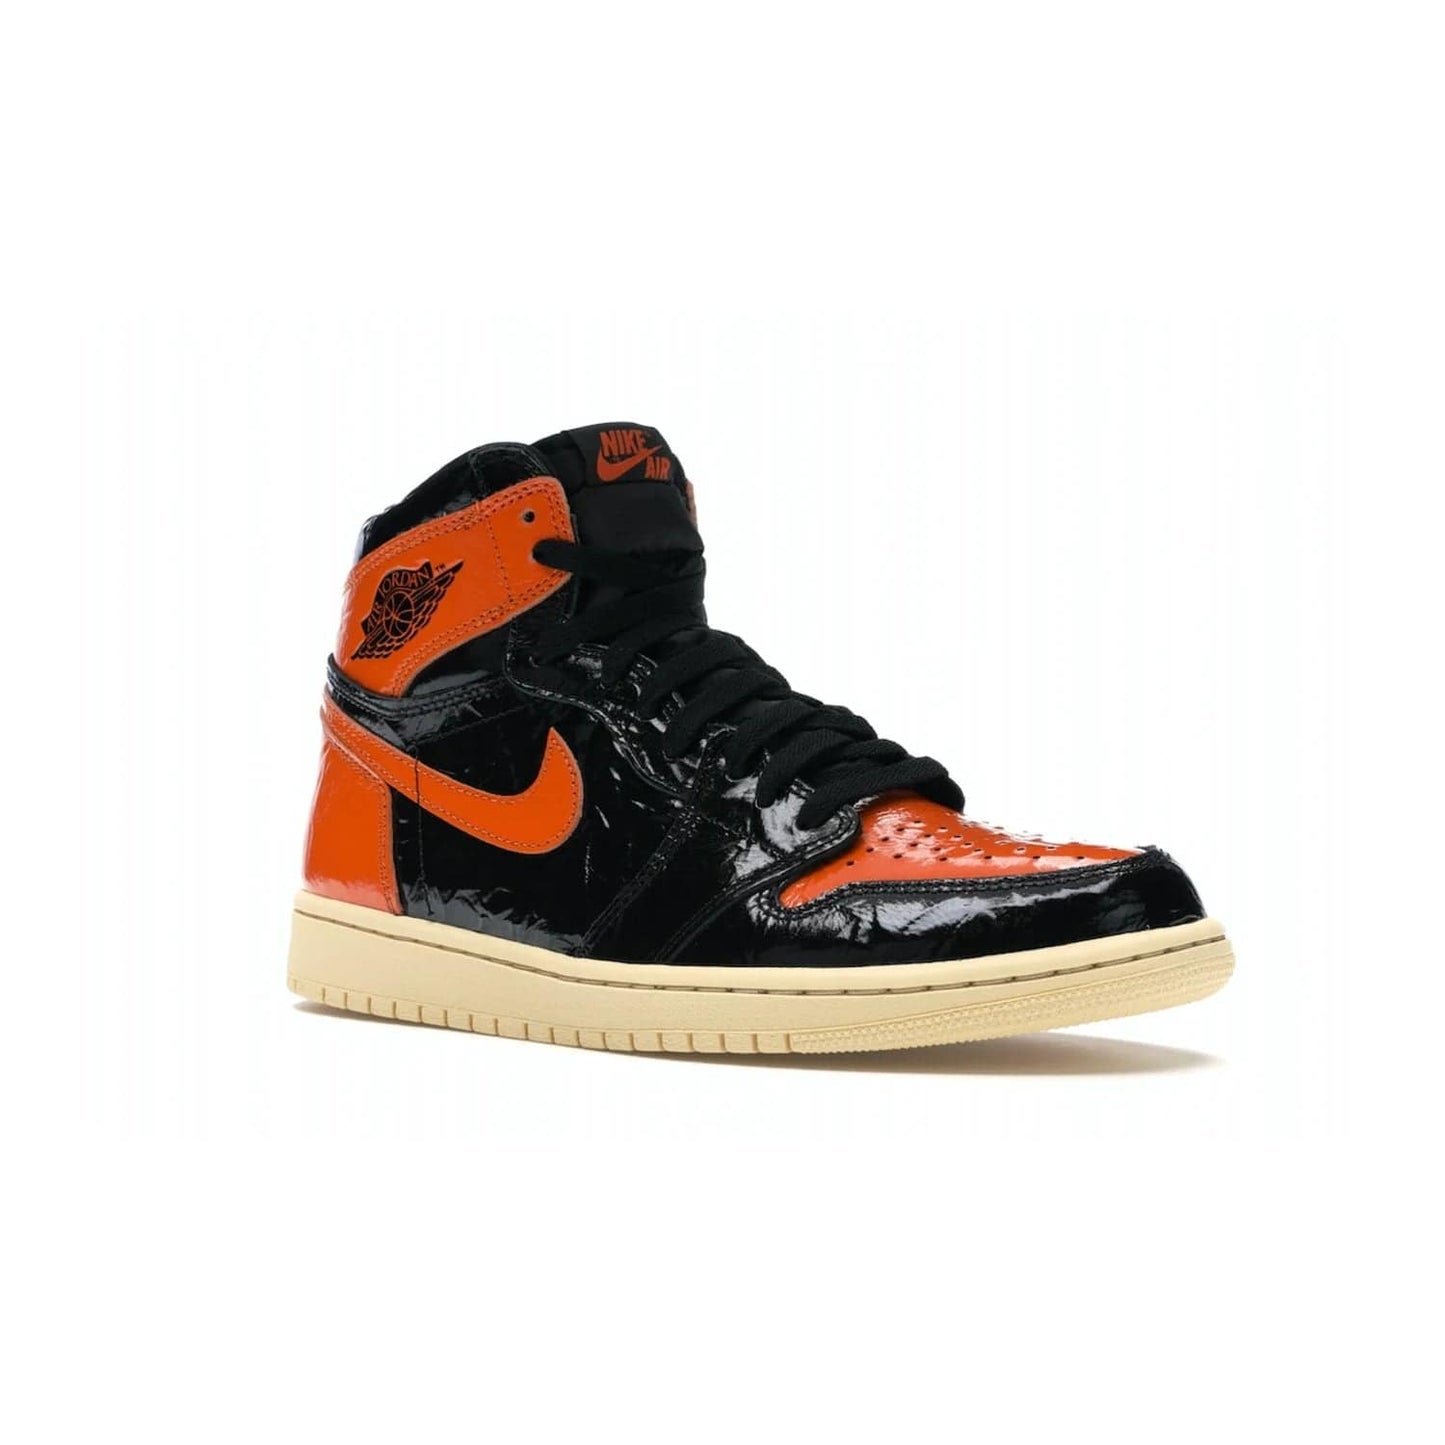 Jordan 1 Retro High Shattered Backboard 3.0 - Image 5 - Only at www.BallersClubKickz.com - #
Jordan 1 Retro High Shattered Backboard 3.0: the perfect blend of modern style and nostalgic flair featuring an orange and black crinkled patent leather upper and yellowed vanilla outsole. Get these exclusive sneakers released in October of 2019!